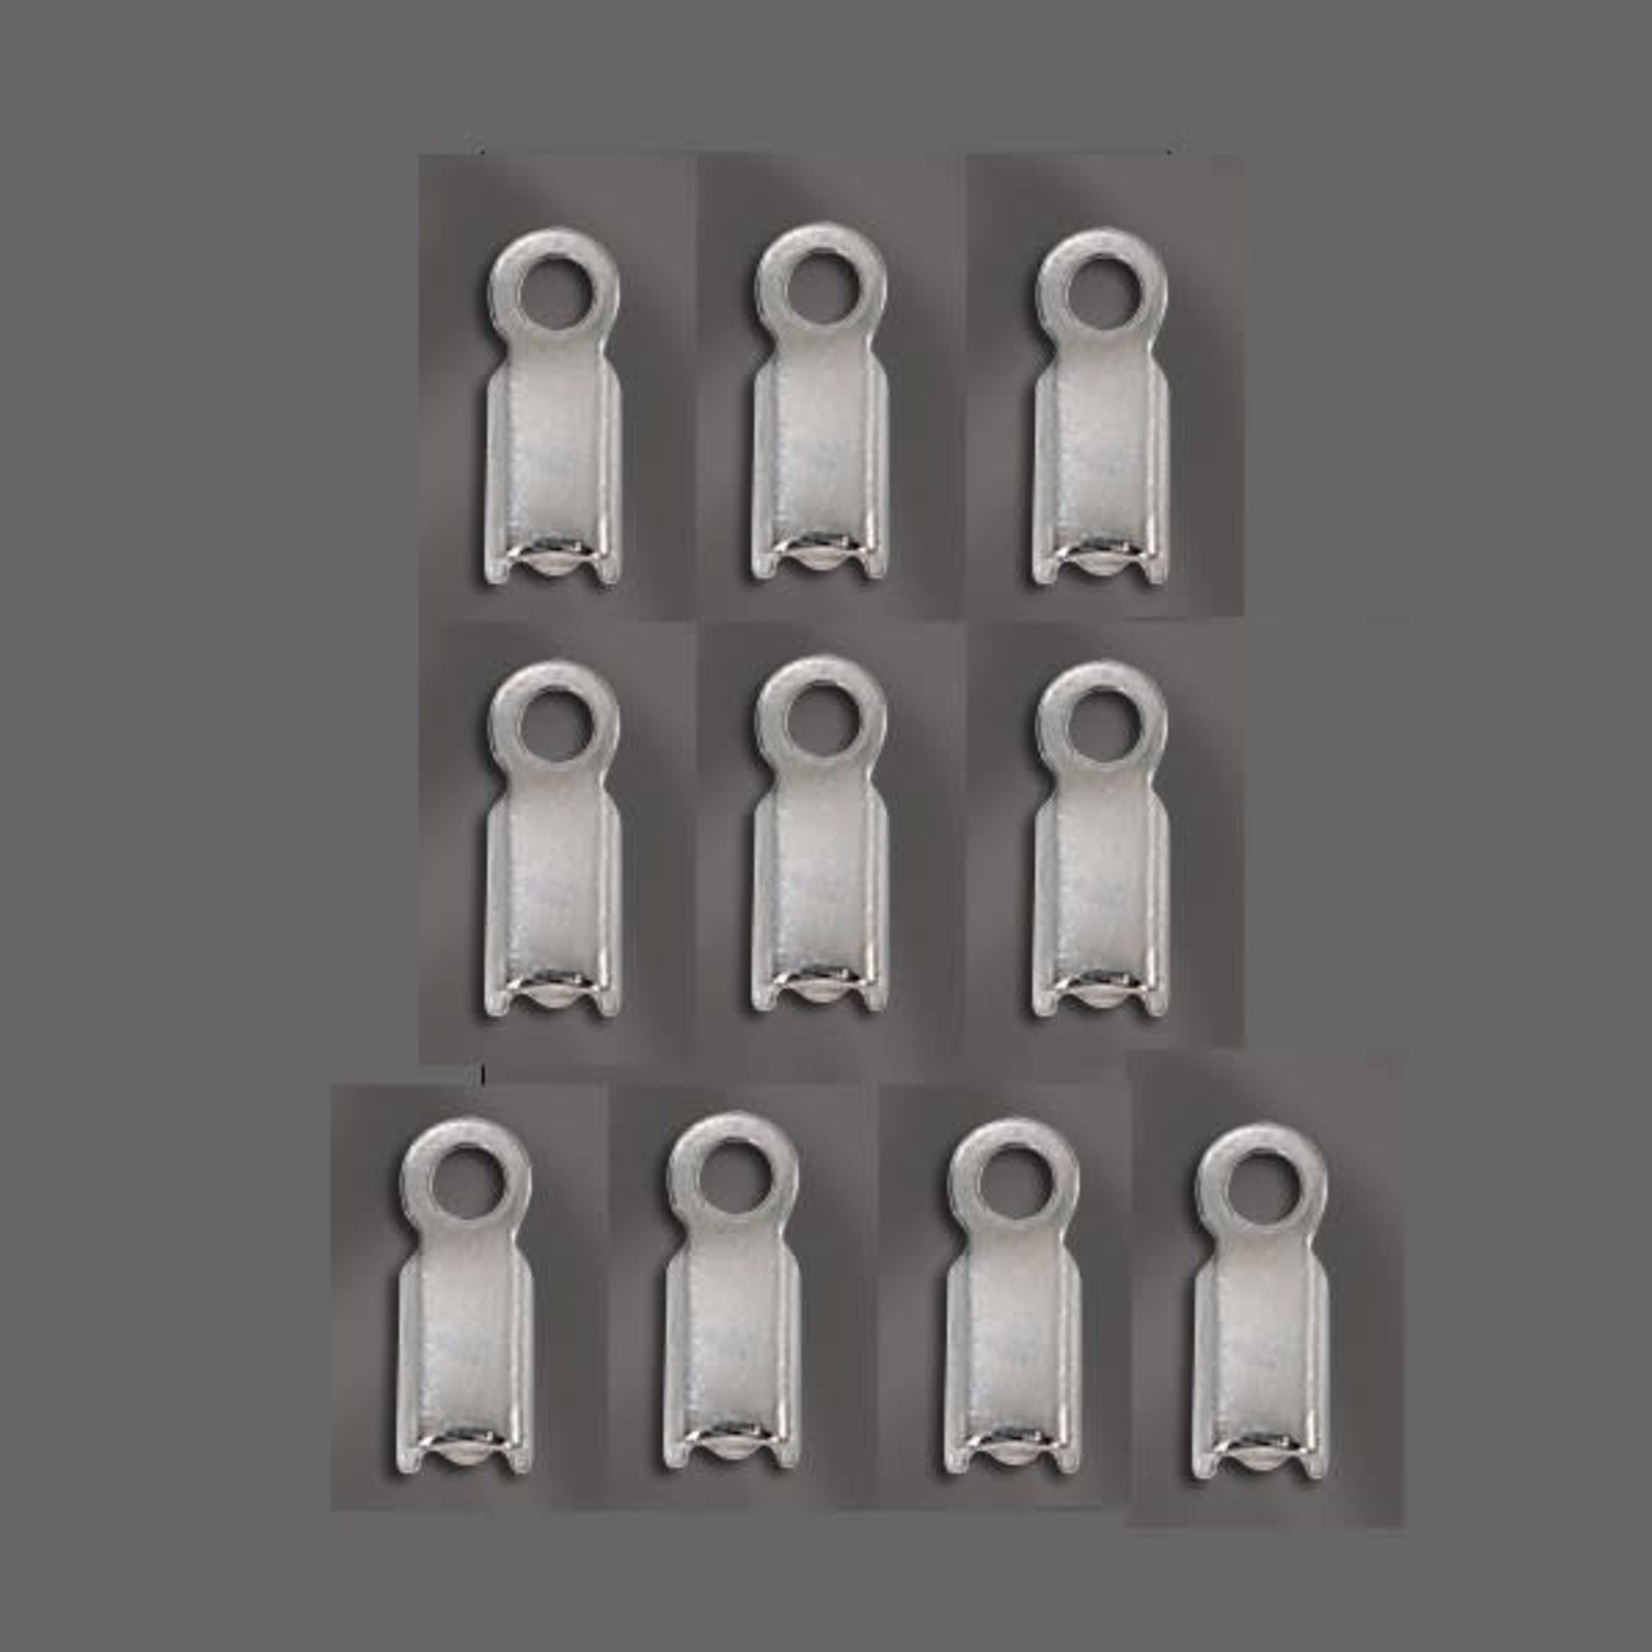 Silver Plated End Cord Fasteners - 10 Pieces